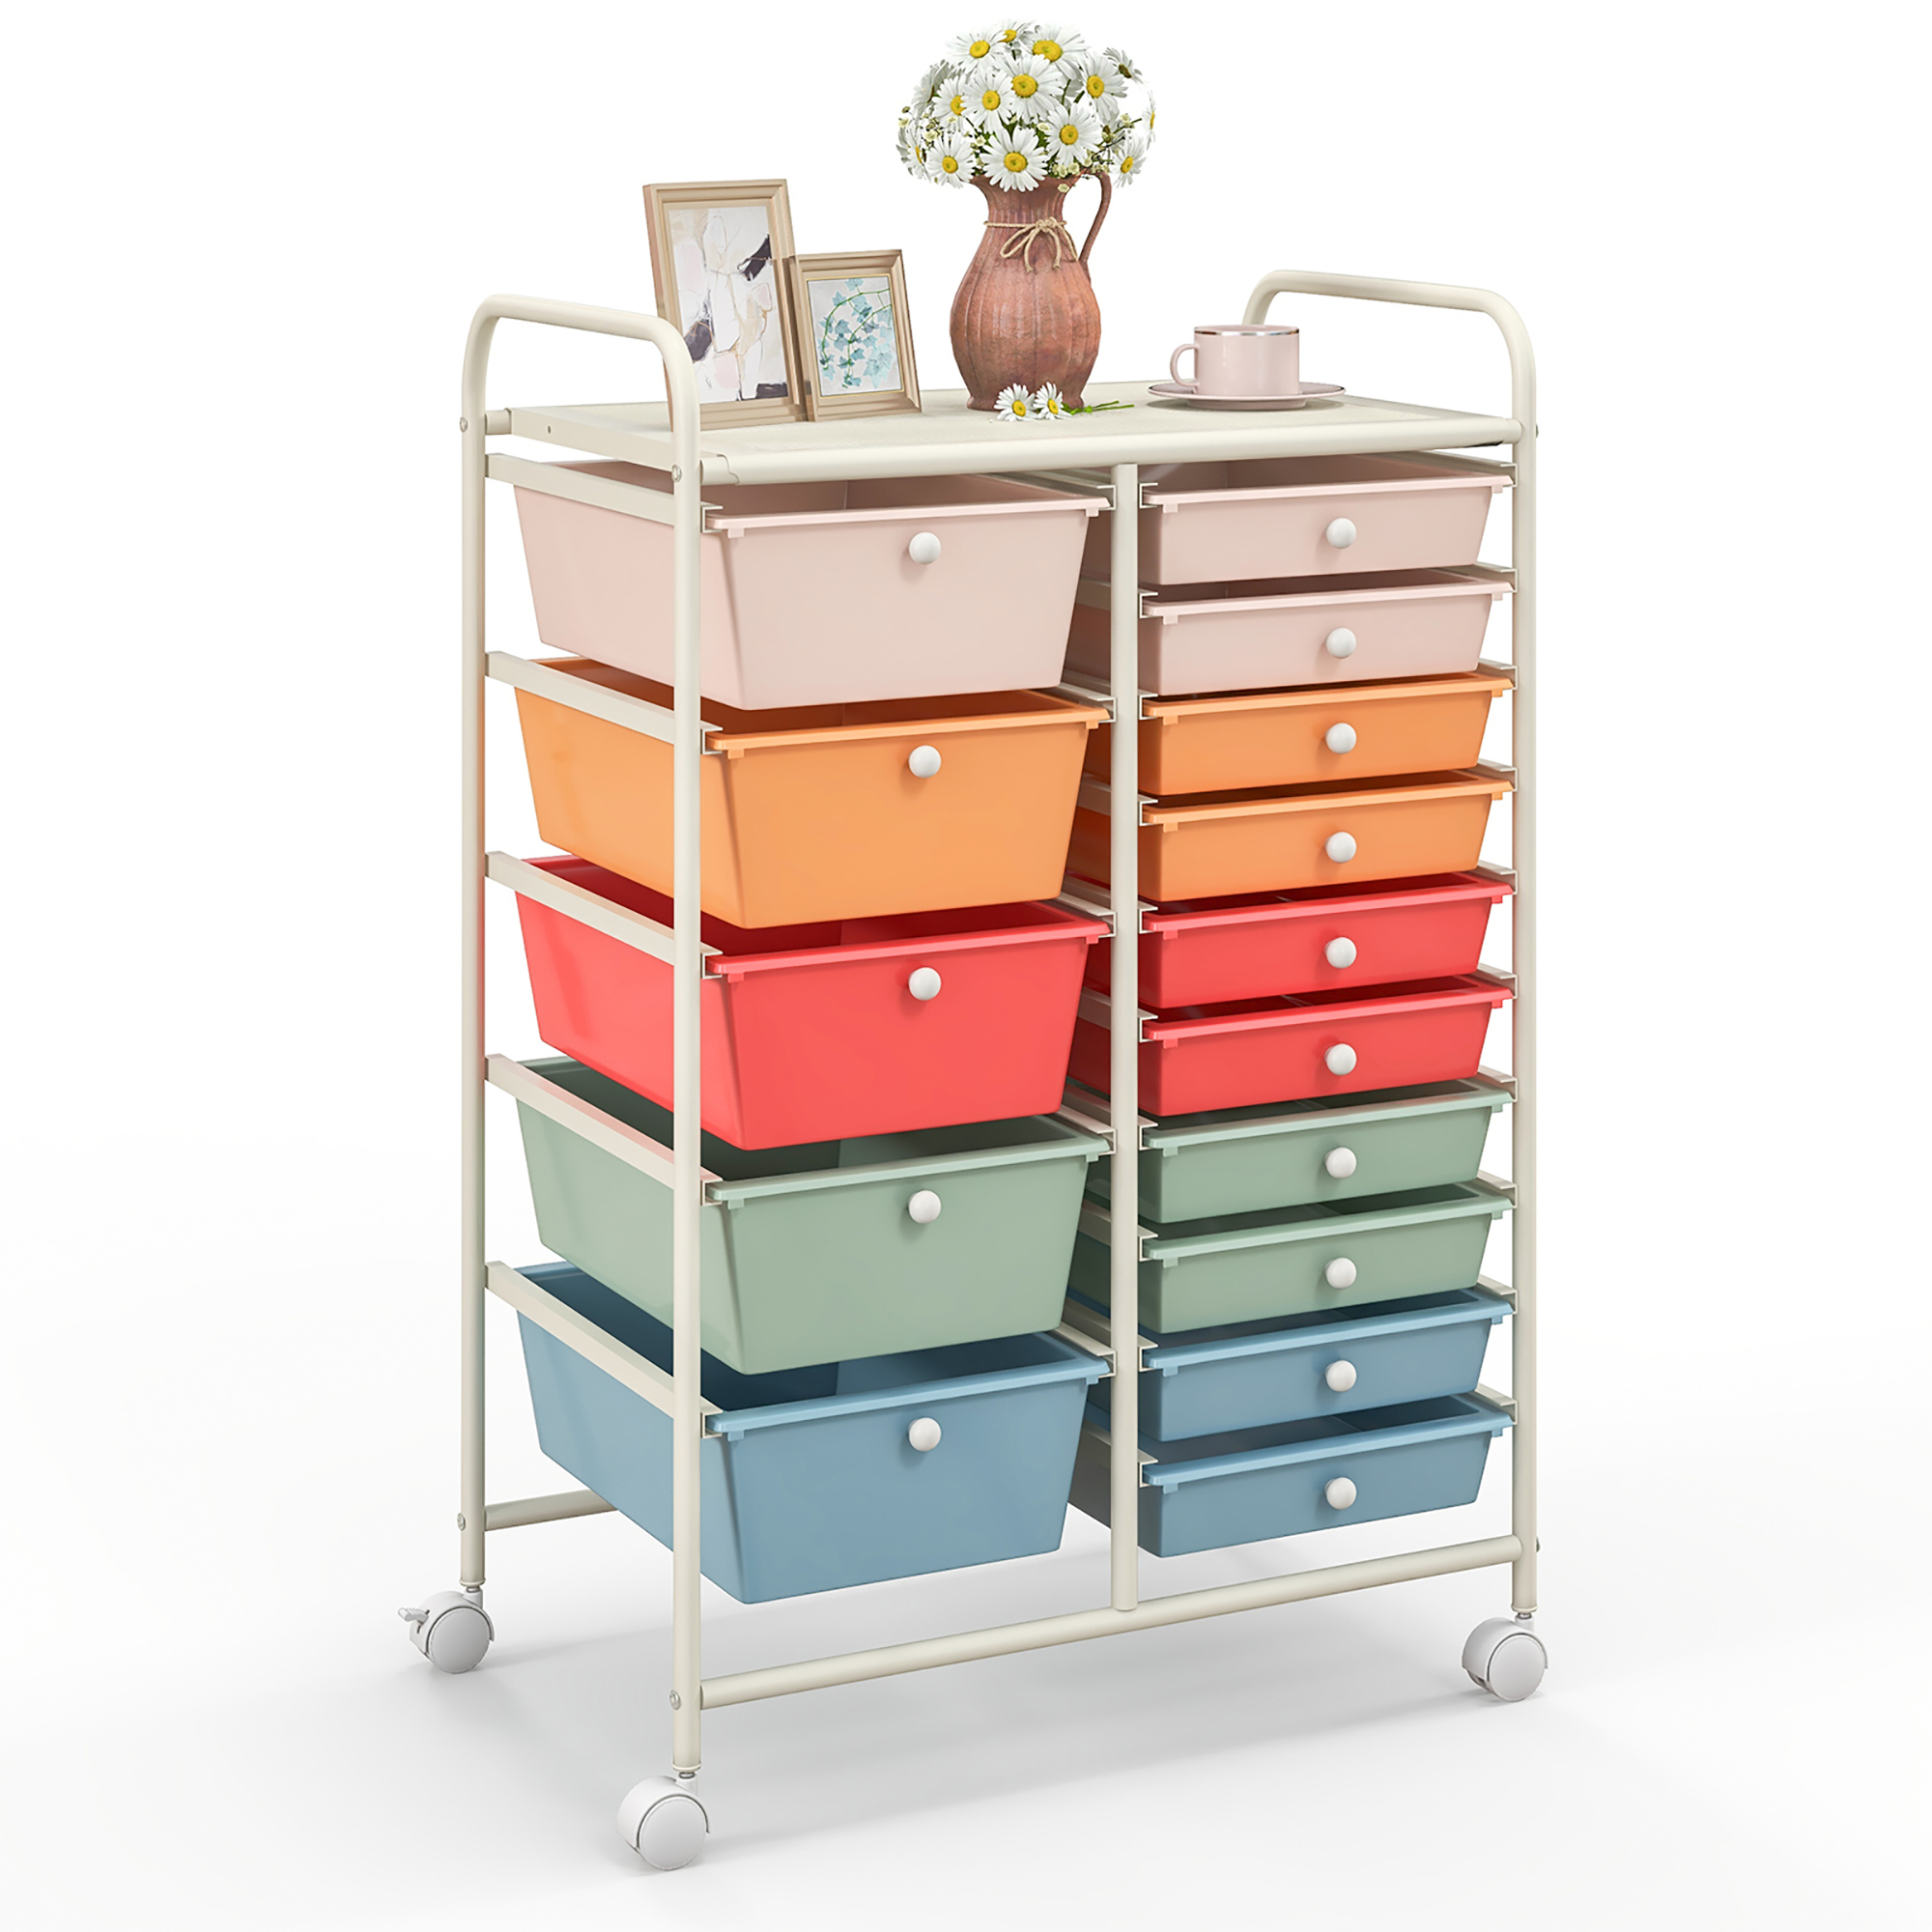 15 Drawer Rolling Storage Cart Opaque Multicolor Drawers Home Organizer - White, Mixed Pink